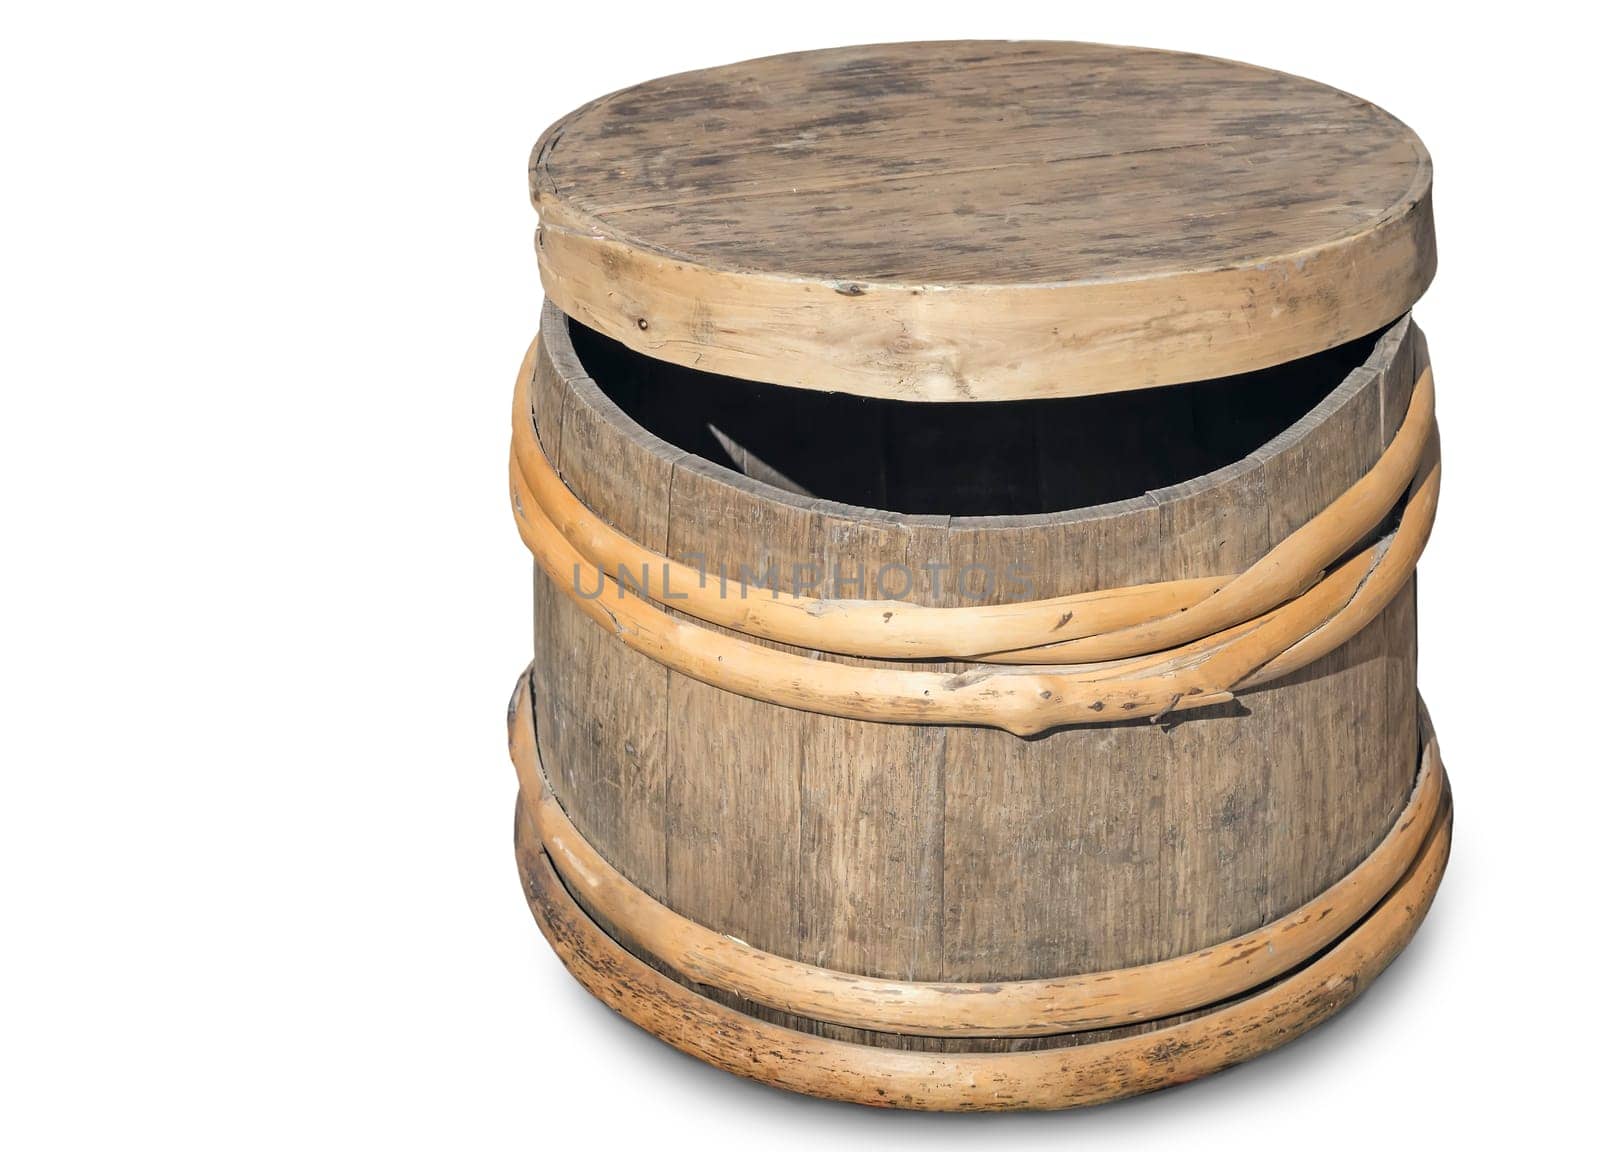 Old oak barrels with wooden hoops. Presented on a white background.